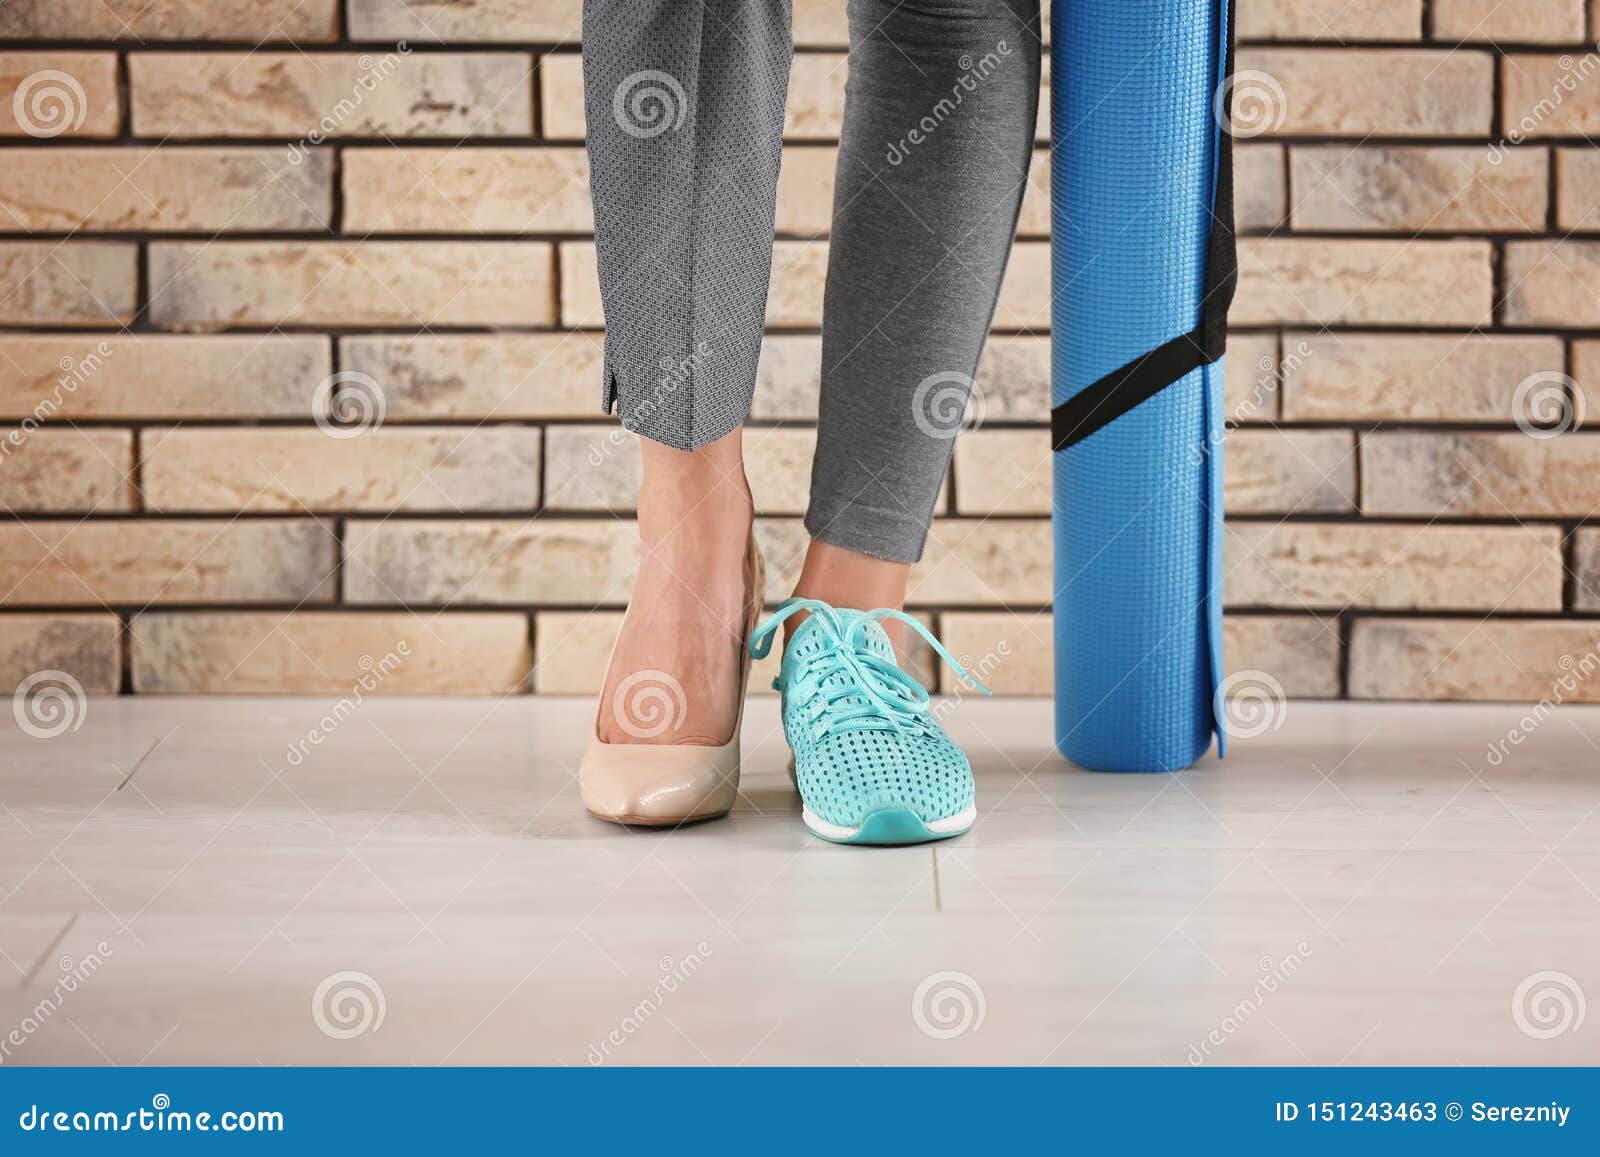 Woman Holding Paper Bag Against Brick Wall Stock Photo 